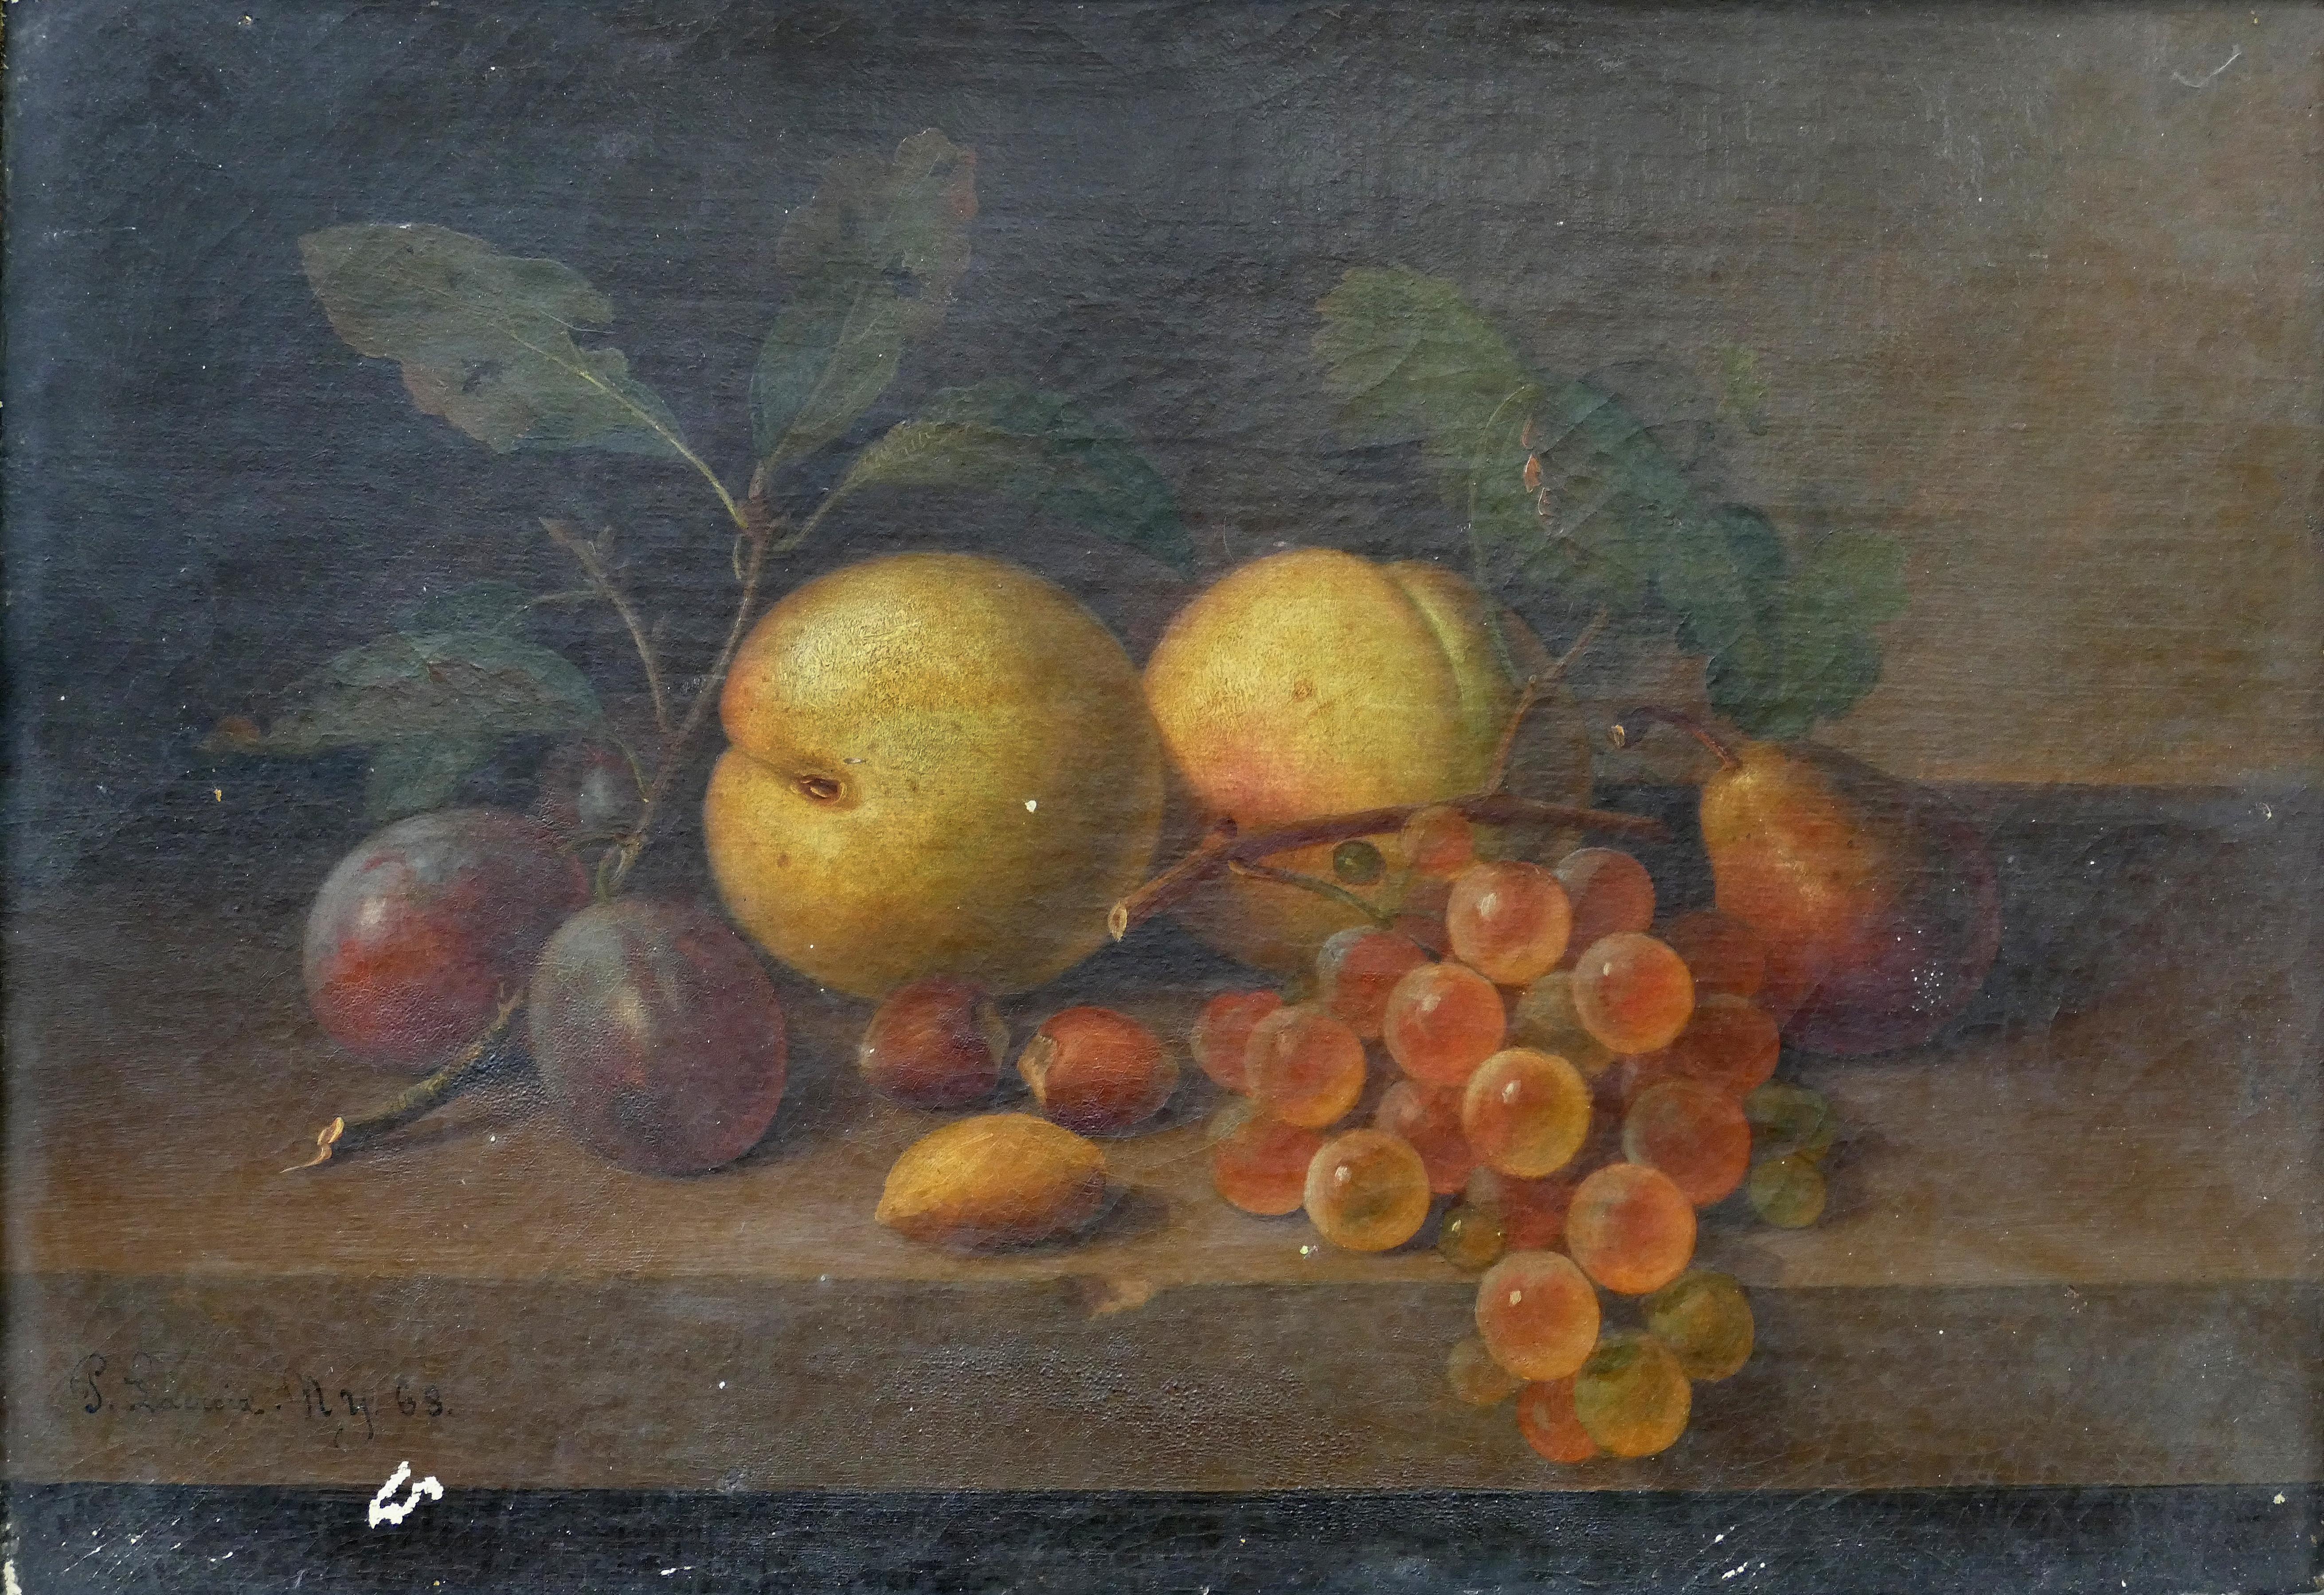 Paul LaCroix fruit still-life oil painting on canvas, 1865 in original frame

Offered for sale is an original fruit still-life oil painting on canvas by the American painter Paul LaCroix (born in France in 1827 - d. New York, 1869). The painting